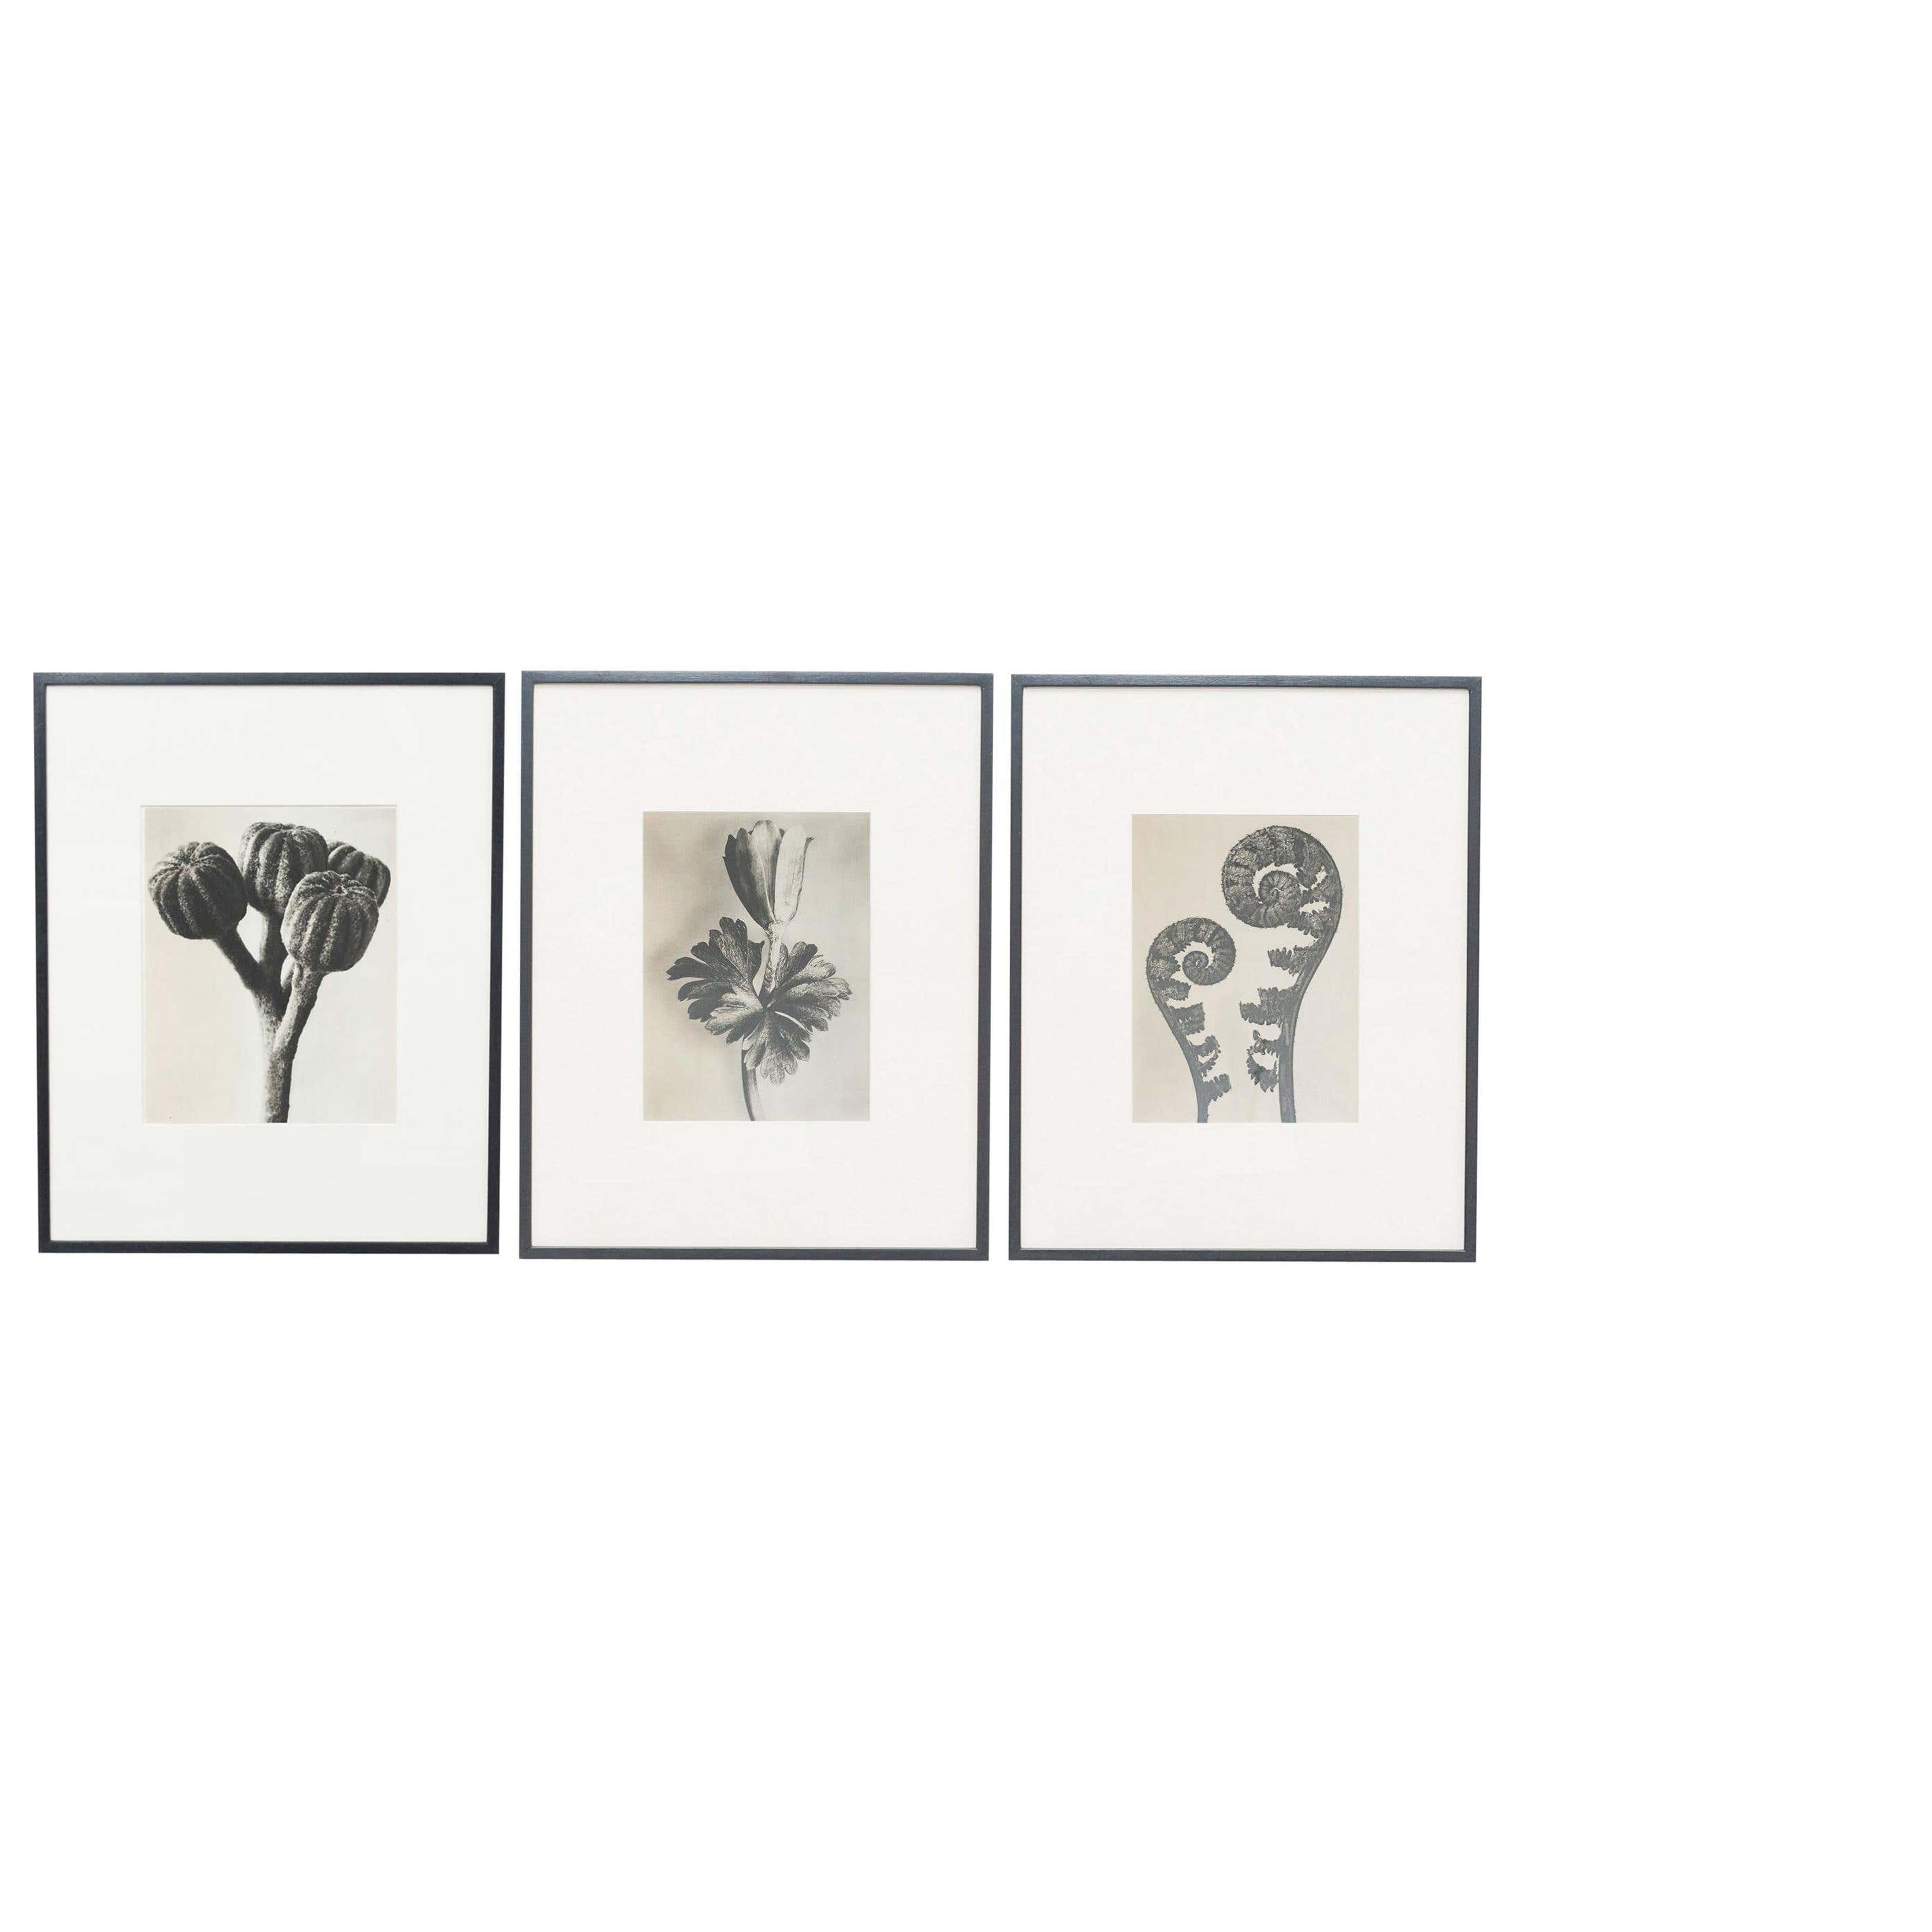 Karl Blossfeldt set of 3 from Photogravures from the edition of the book 'Wunder in der Natur' in 1942.

In original condition, with minor wear consistent with age and use, preserving a beautiful patina.

Karl Blossfeldt (June 13, 1865-December